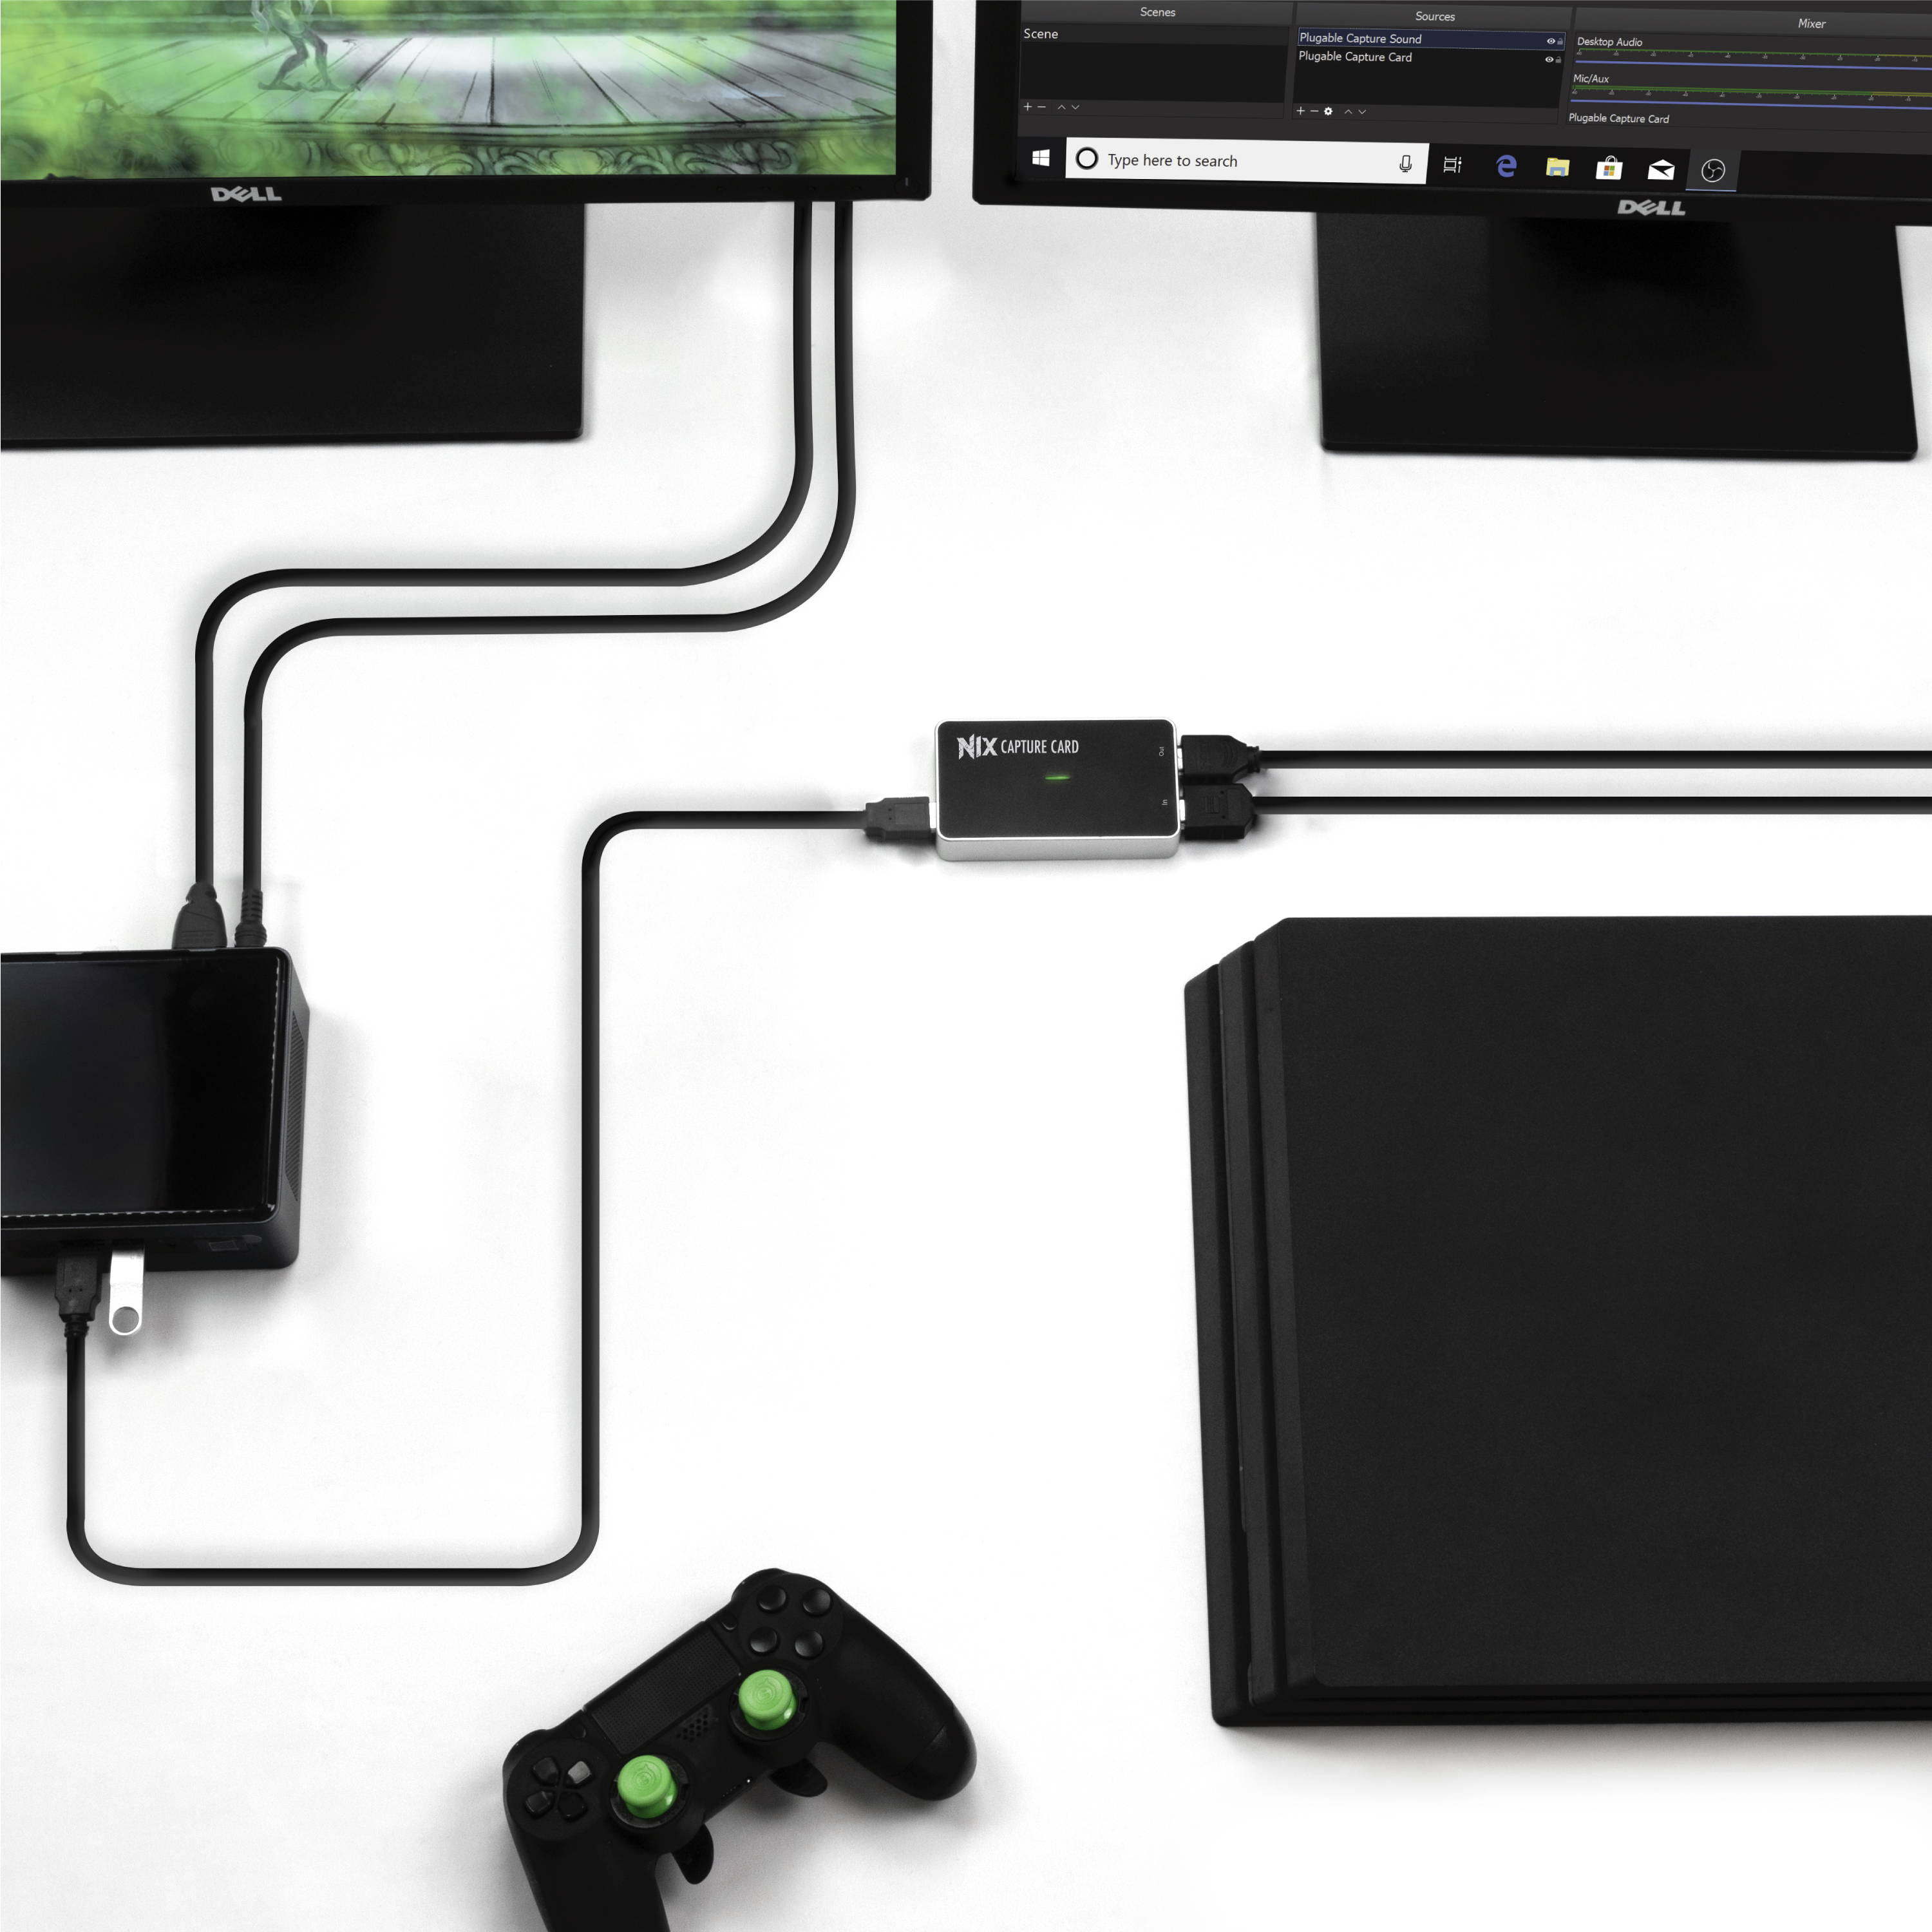 NIX Capture card connected with system, monitors, and controller